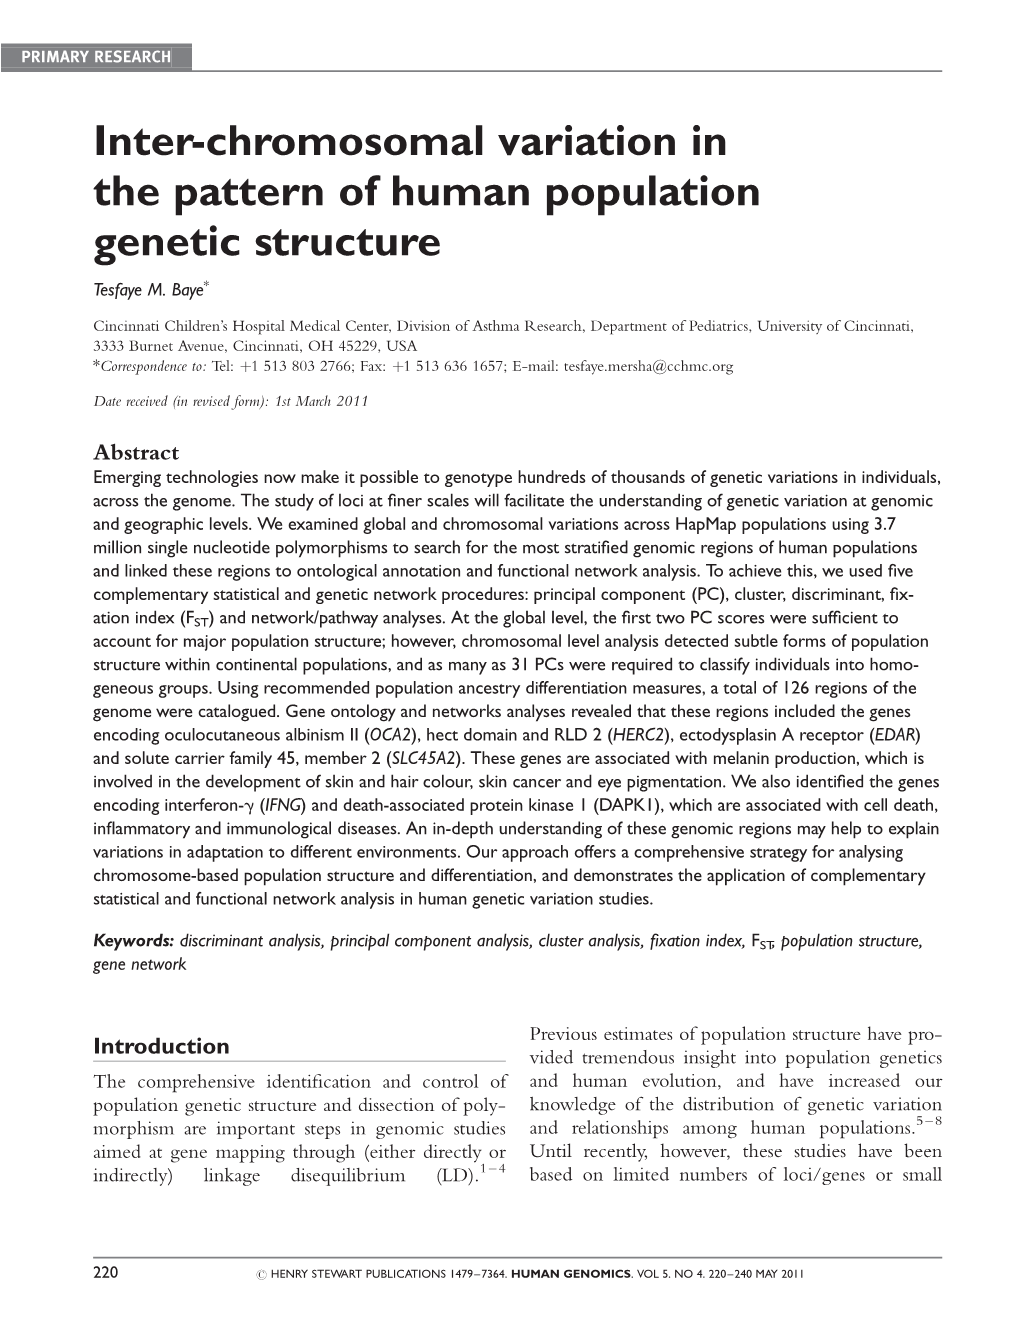 Inter-Chromosomal Variation in the Pattern of Human Population Genetic Structure Tesfaye M